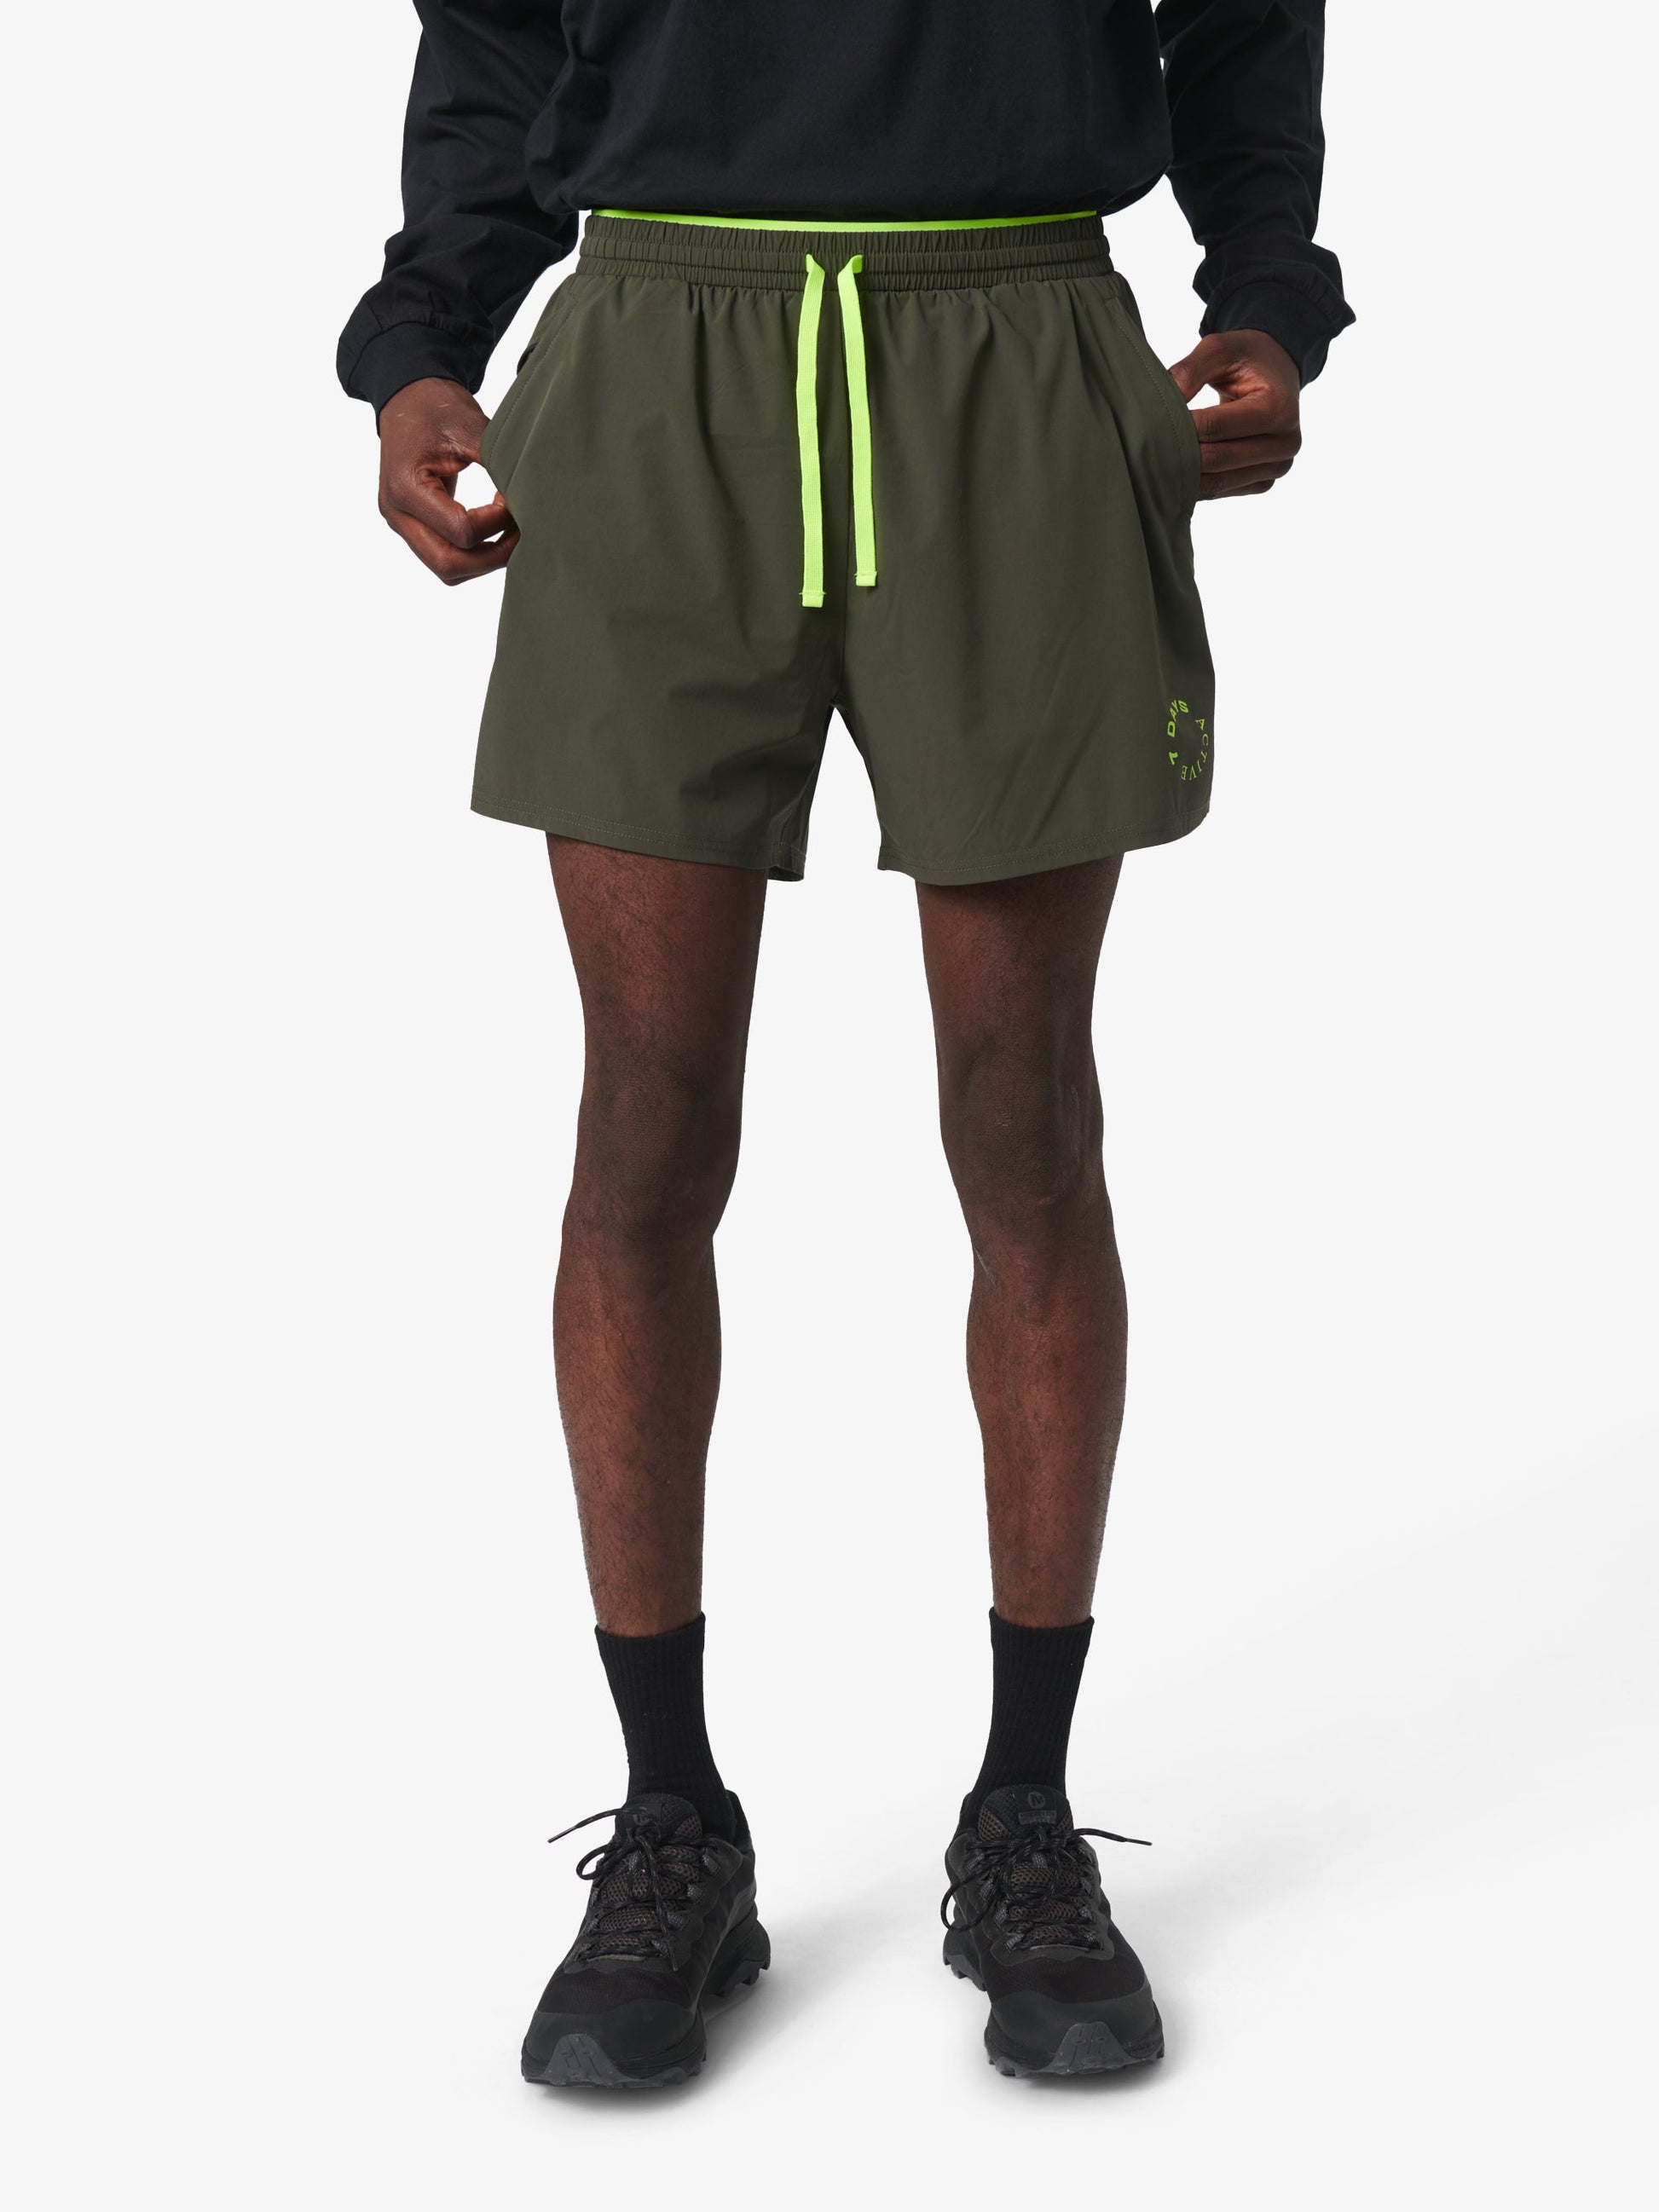 7 DAYS Two-in-One Shorts Shorts 233 Agave Green